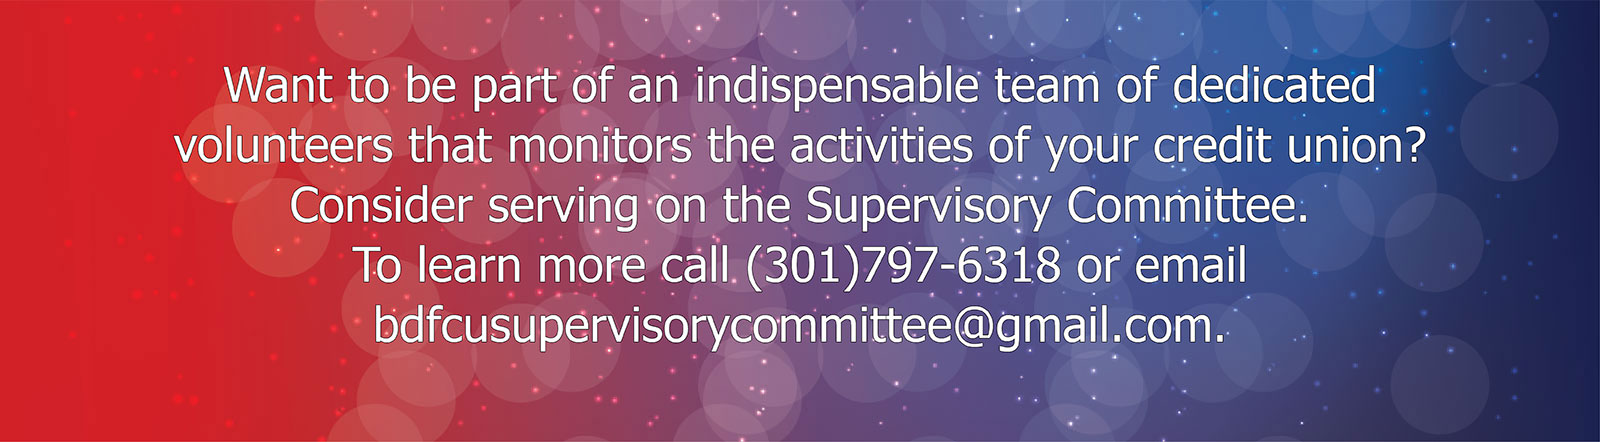 Want to be part of an indispensable team of dedicated volunteers that monitors the activities of your credit union? Consider serving on the Supervisor Committee. To learn more, call (301)797-6318 or email bdfcusupervisorycommittee at gmail dot com.